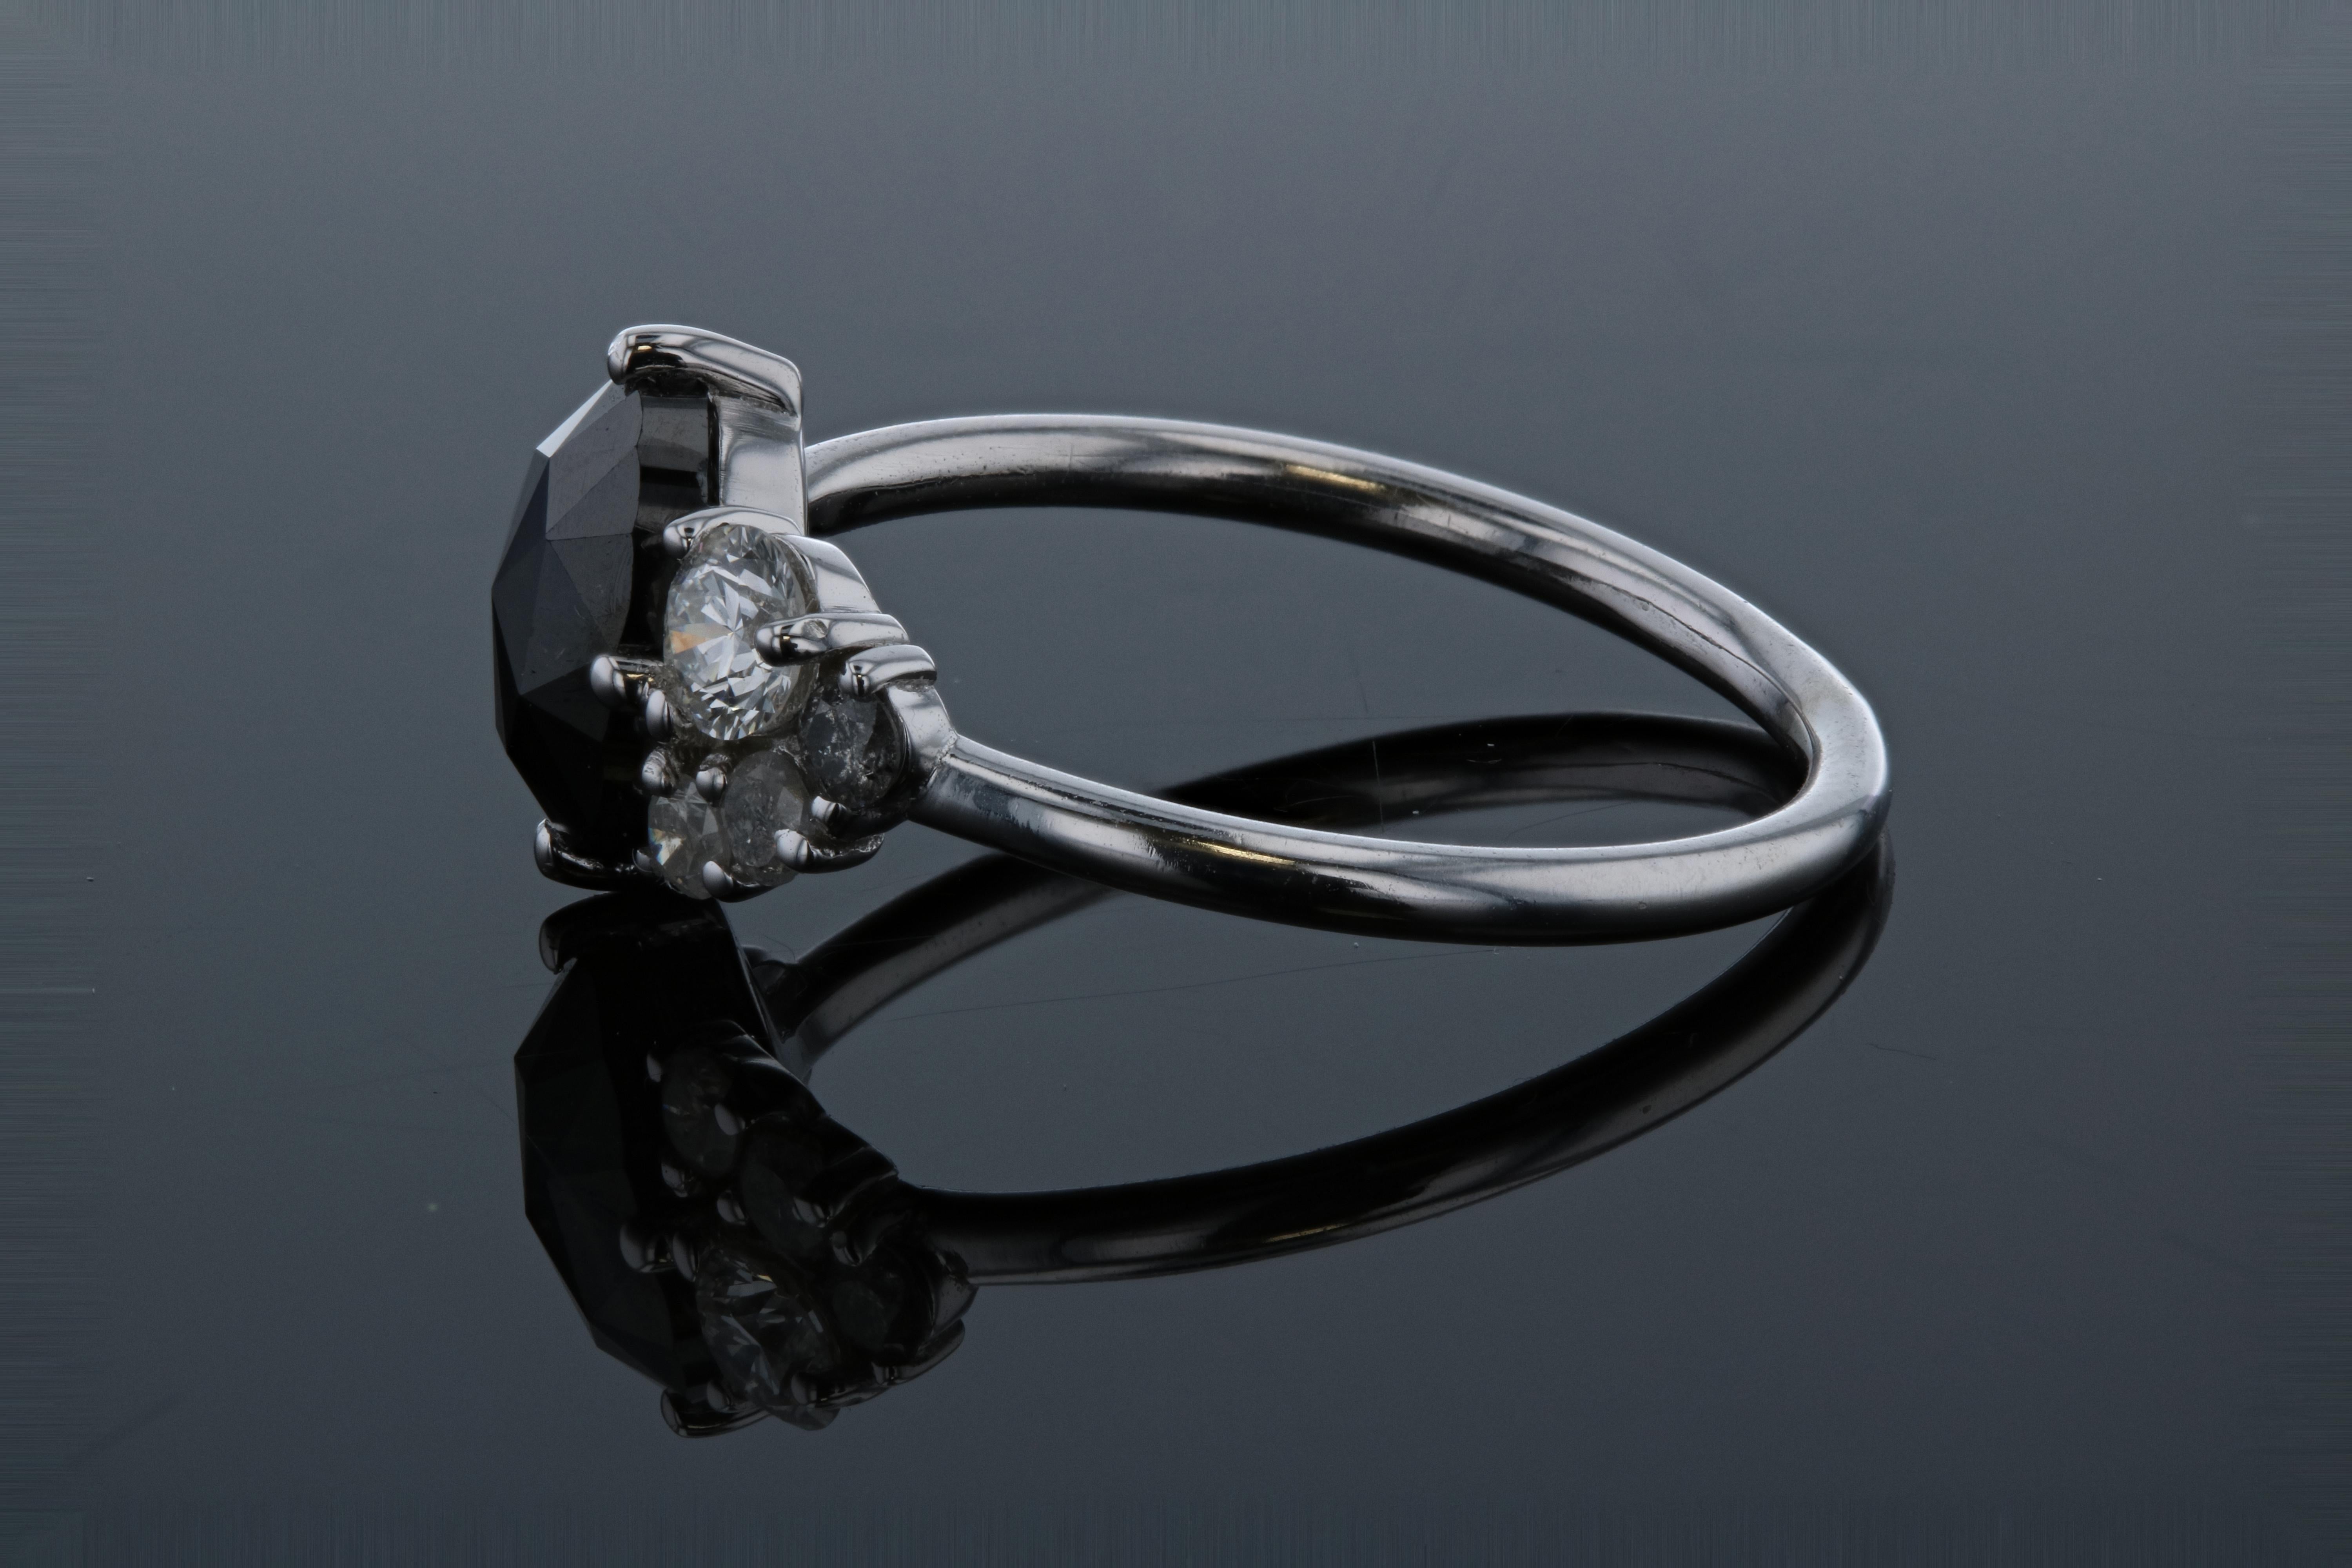 This stunning black diamond salt and pepper diamond with matching wedding band is perfect for the modern bride. This diamond ring is crafted in 14kt white gold, & contains an Oval Diamond (1.29 total carat weight) surrounded by 5 round salt and